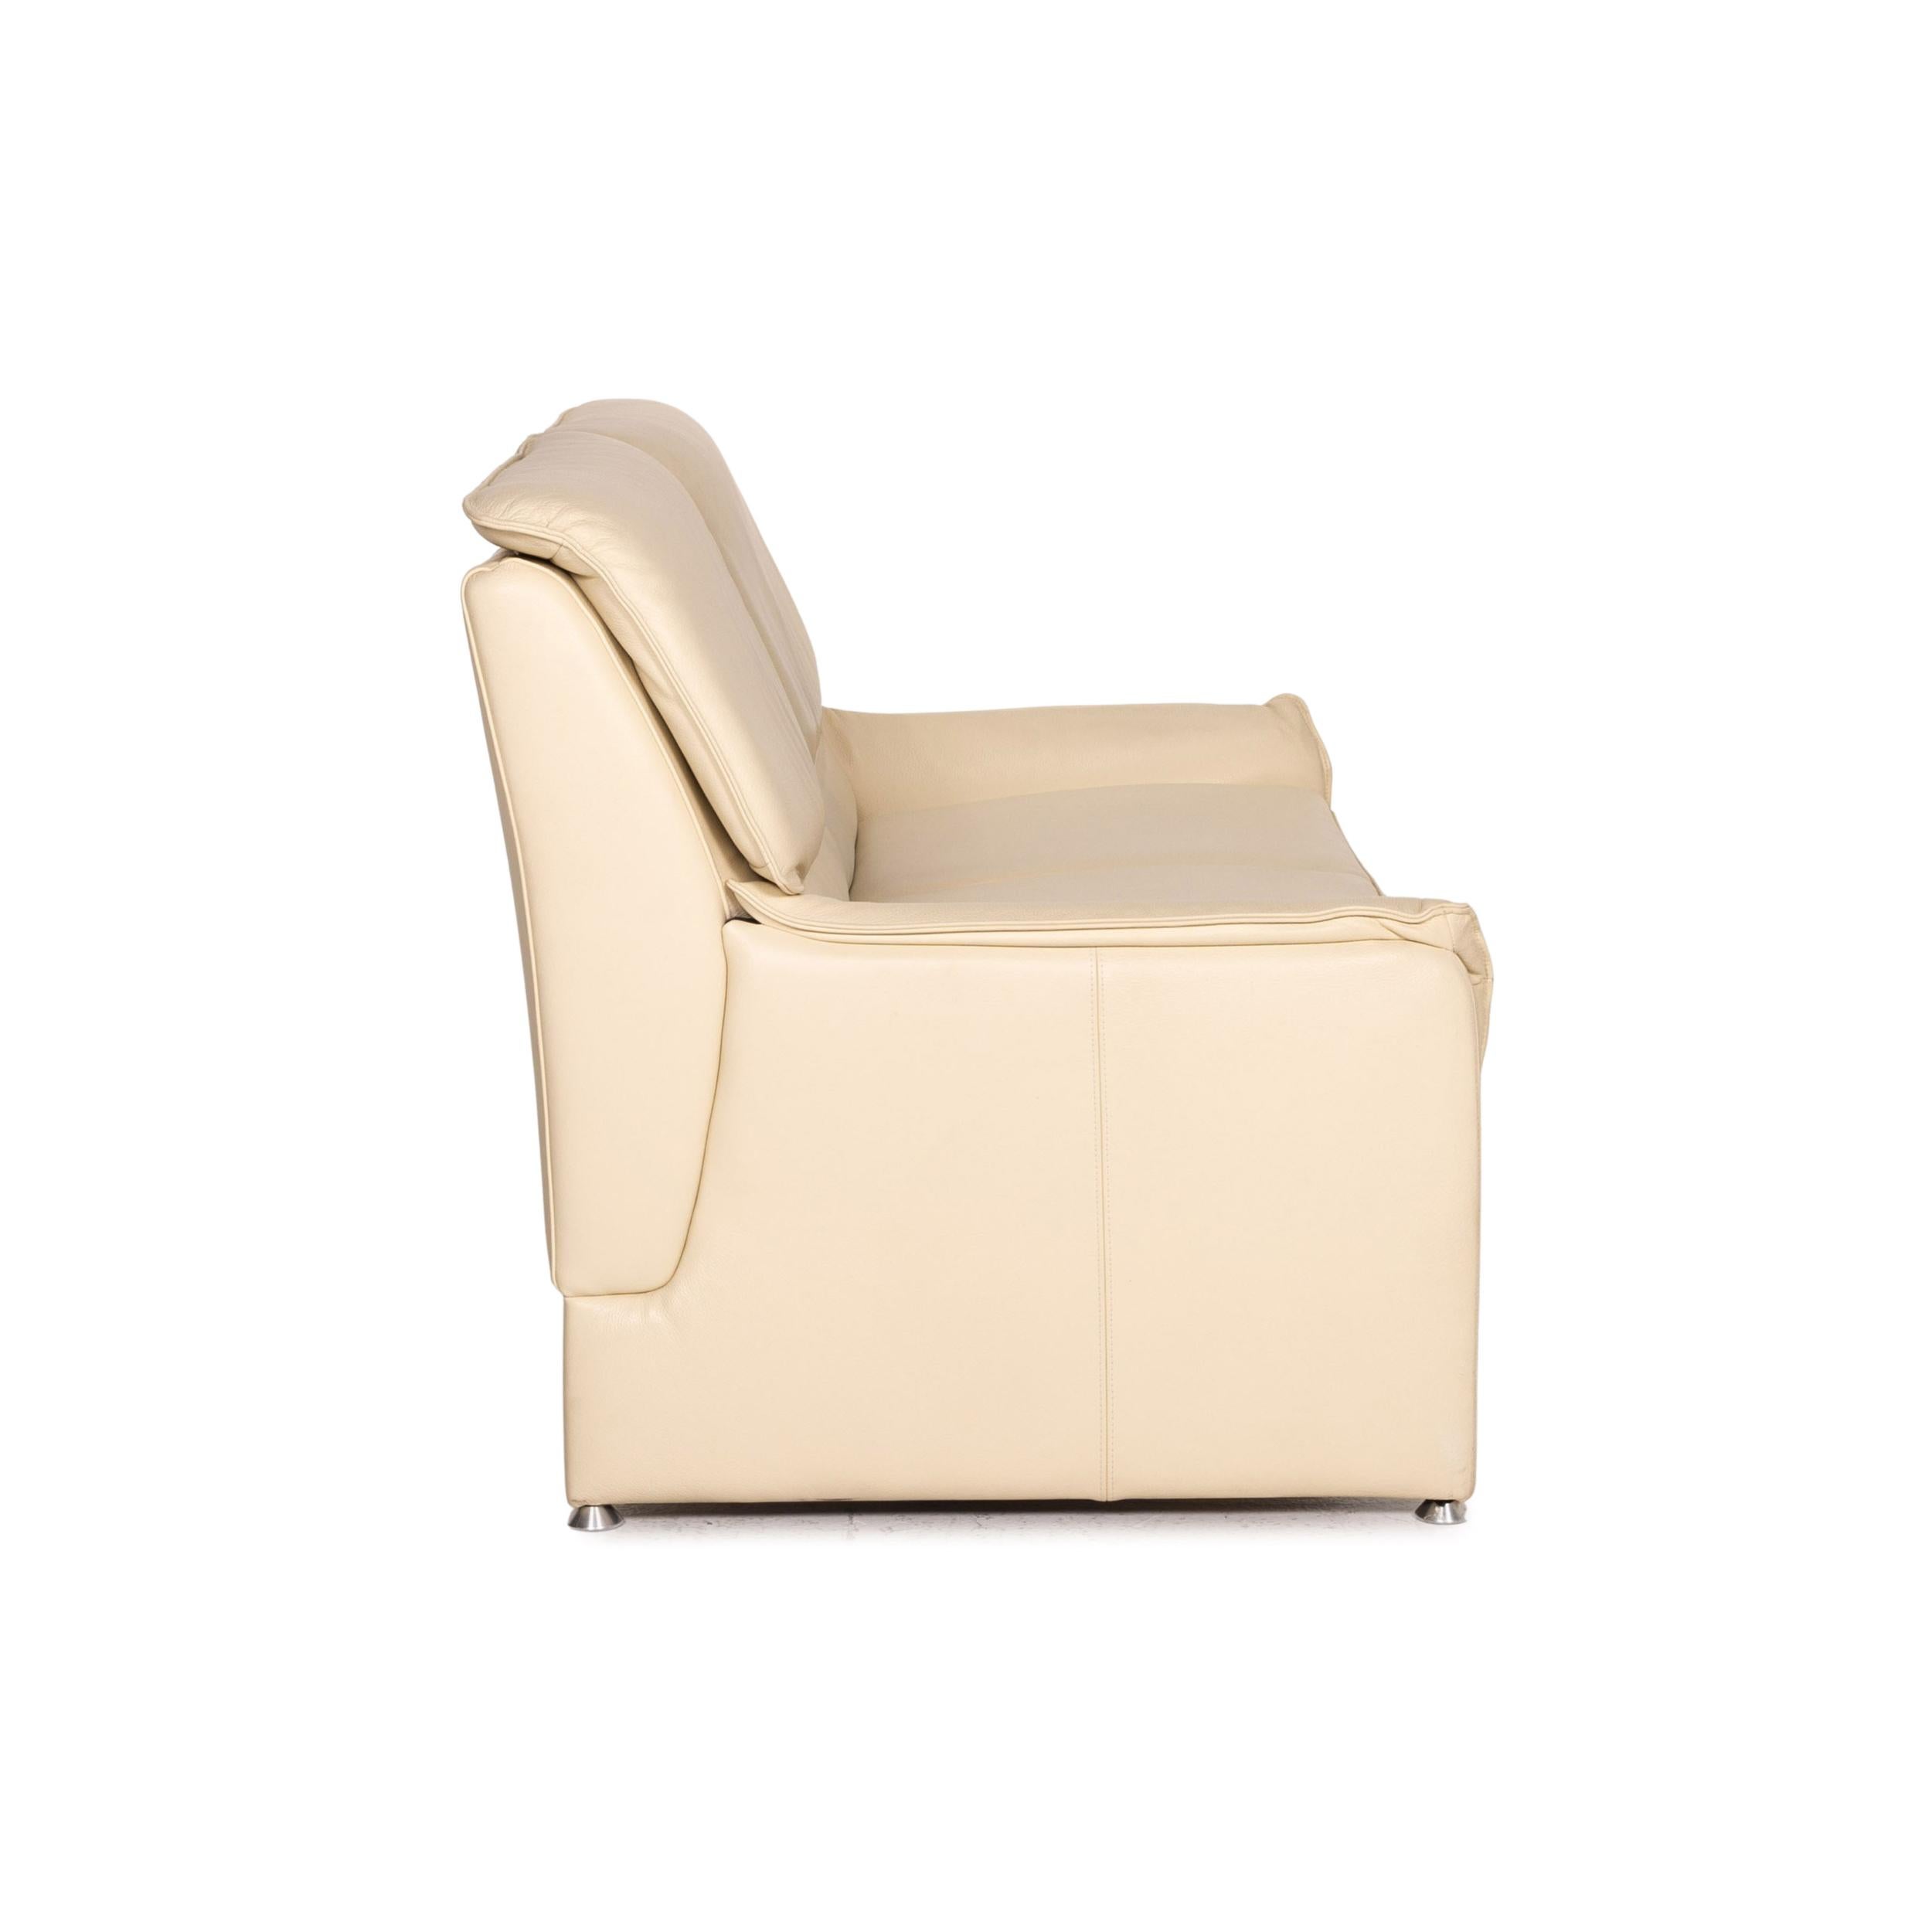 Laauser Leather Sofa Cream Two-Seater Function Couch For Sale 2